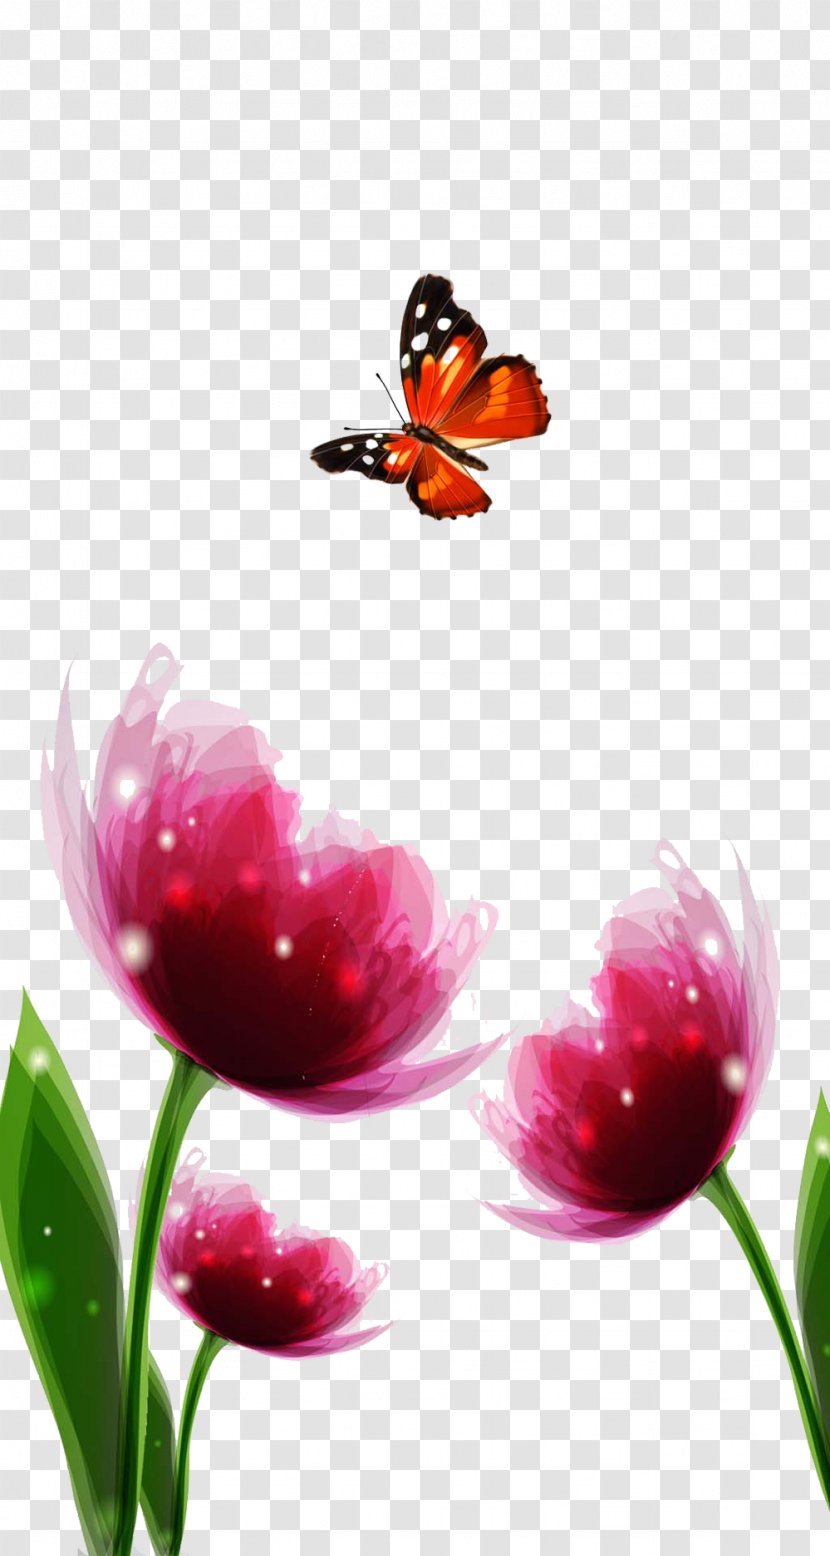 Butterfly Nymphalidae Tulip Flower - Insect - Tulips Cited Picture Material Transparent PNG